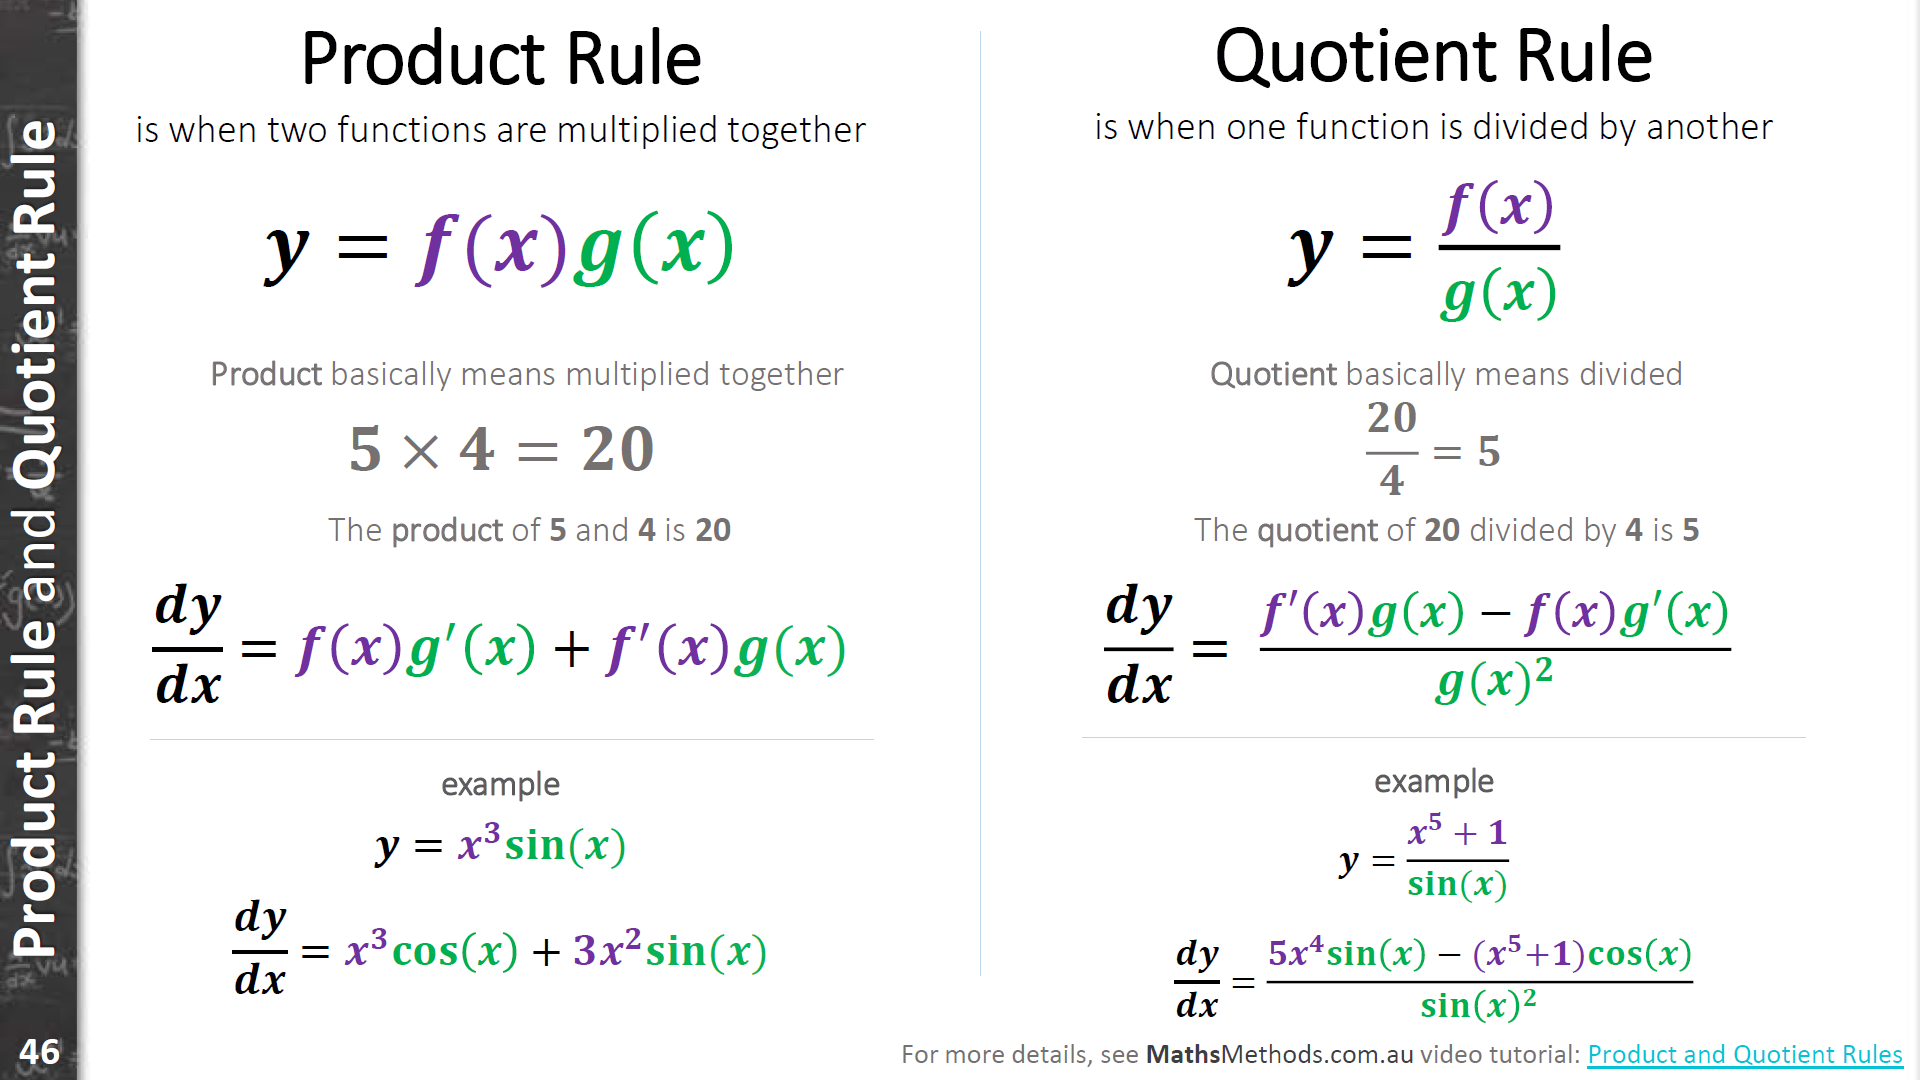 Product Rule and Quotient Rule in Maths Methods